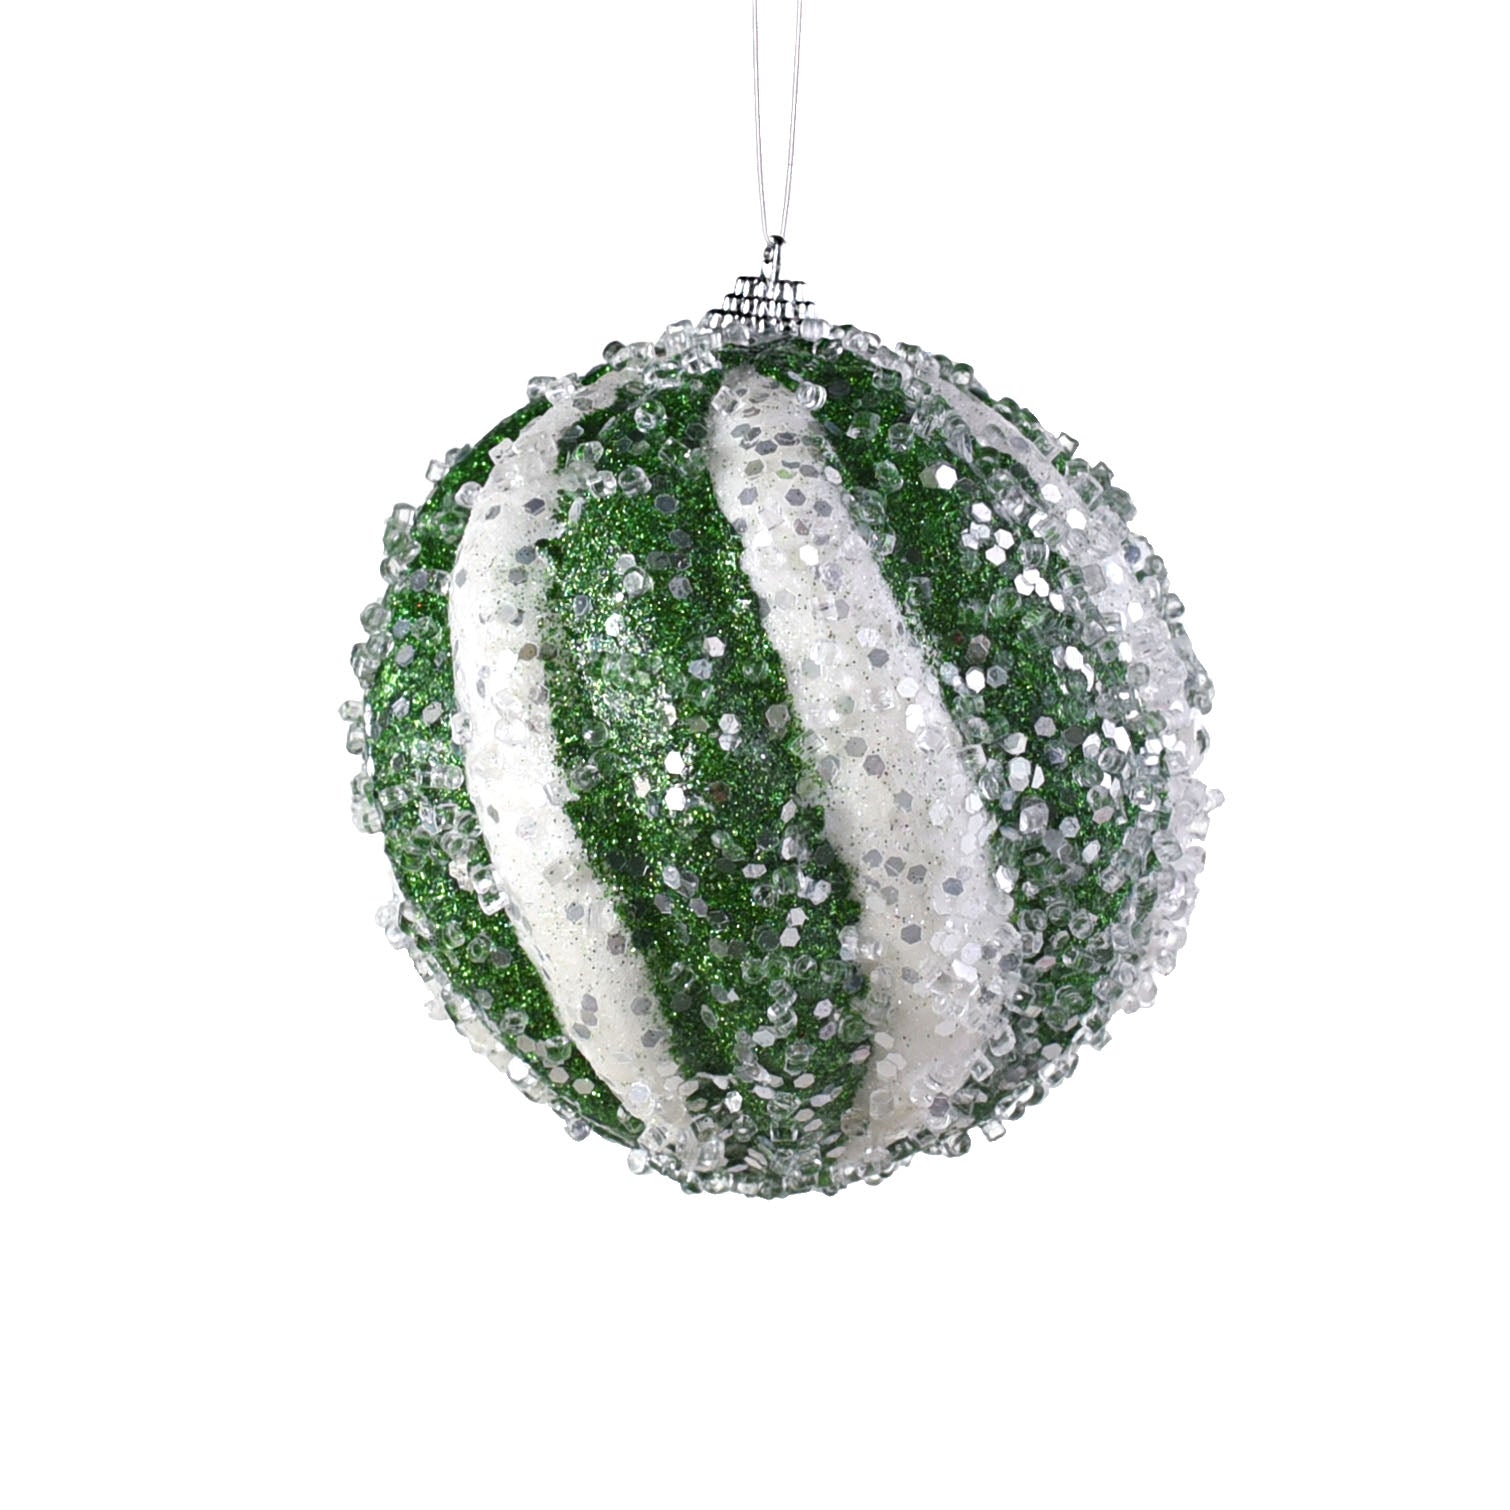 4.5" Icy Ball Ornament: Green & White